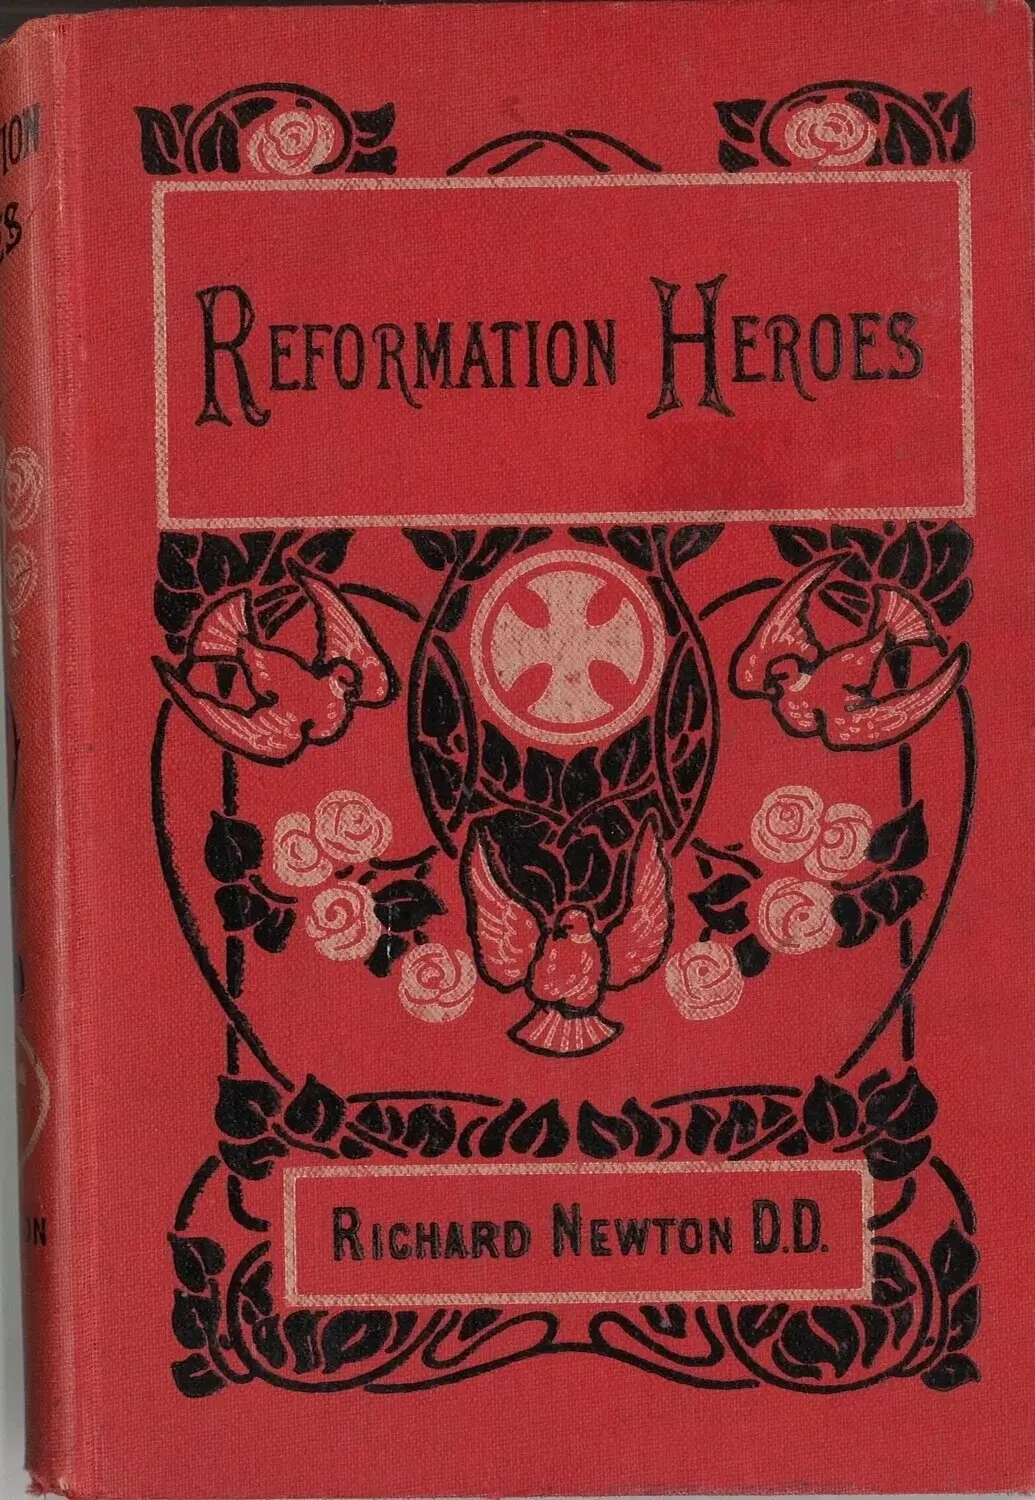 Reformation Heroes by Reverend Richard Newton